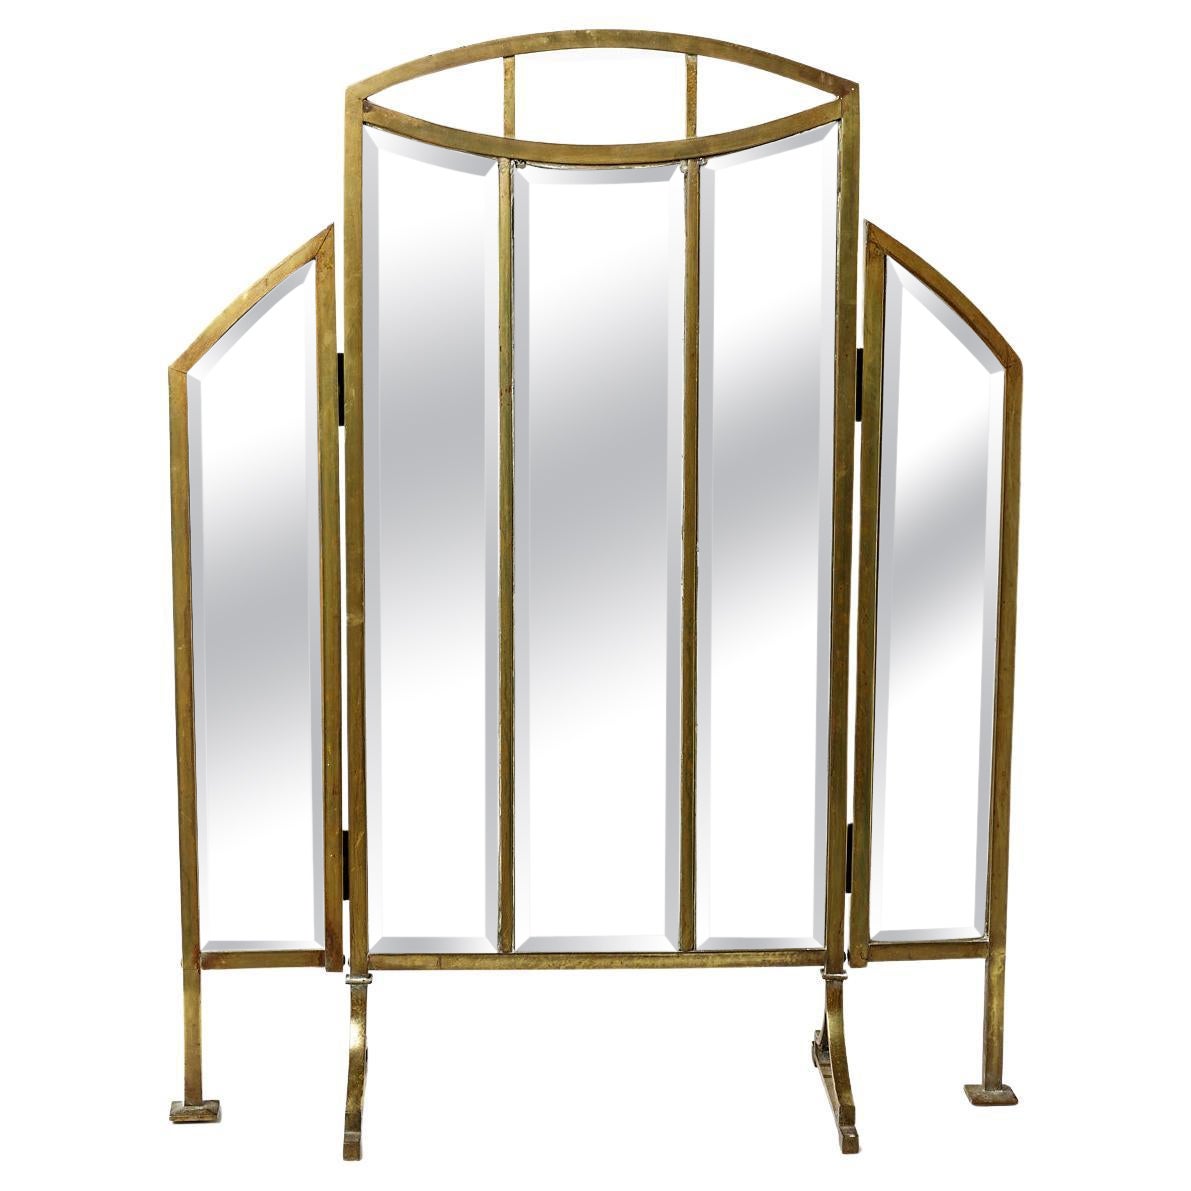 1900 French Art Deco Golden Brass and Glass Fire Screen for Fireplace